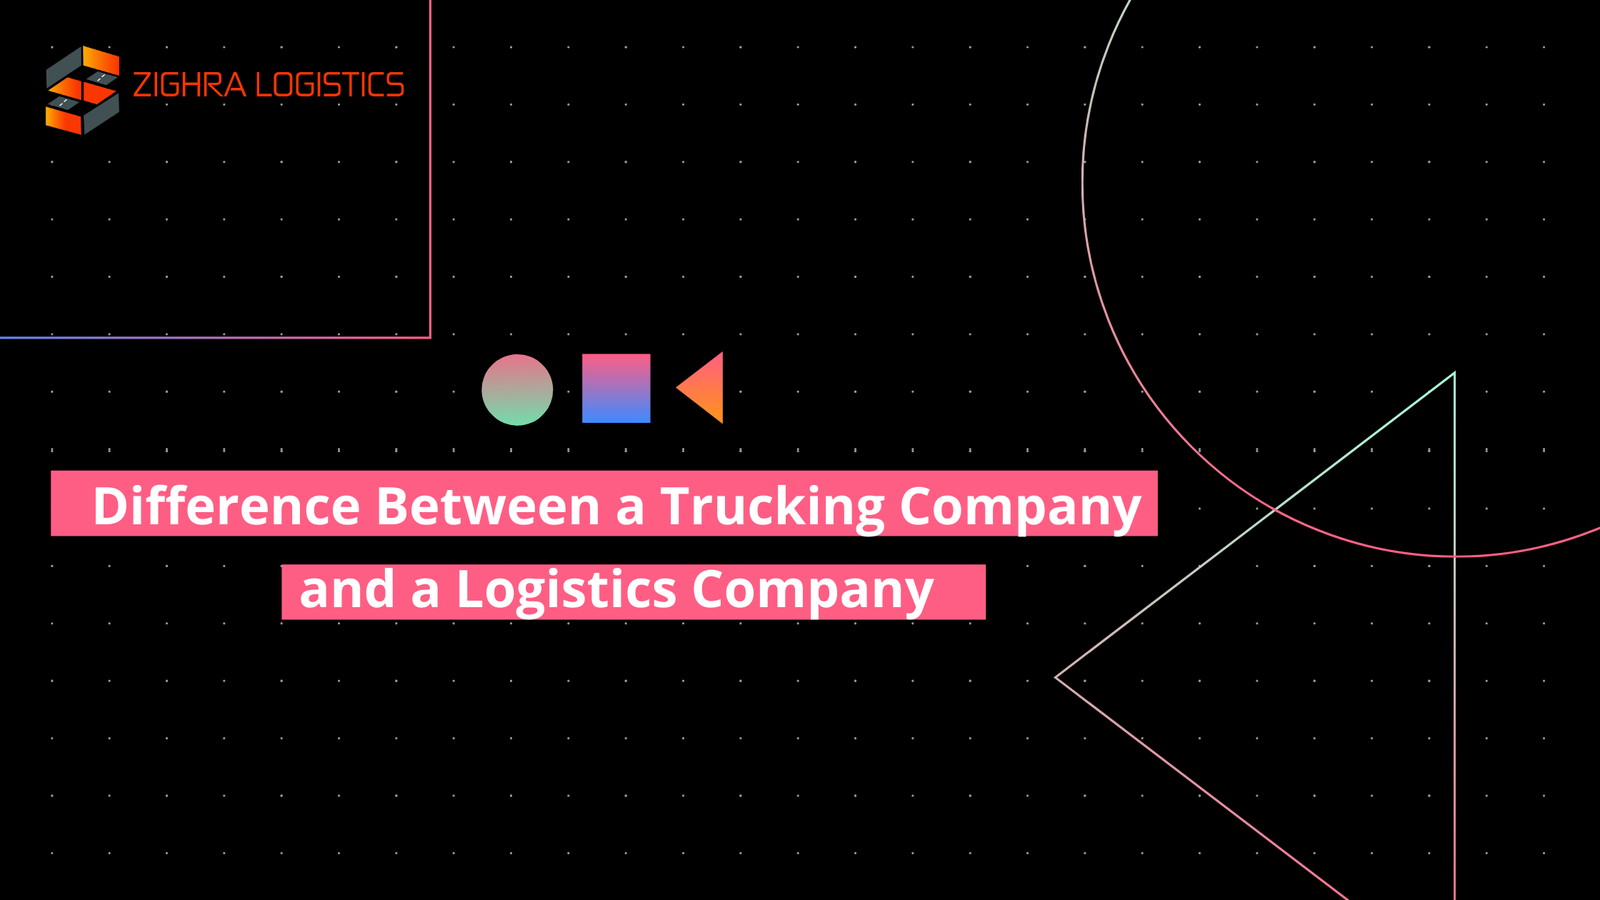 Difference Between a Trucking Company and a Logistics Company